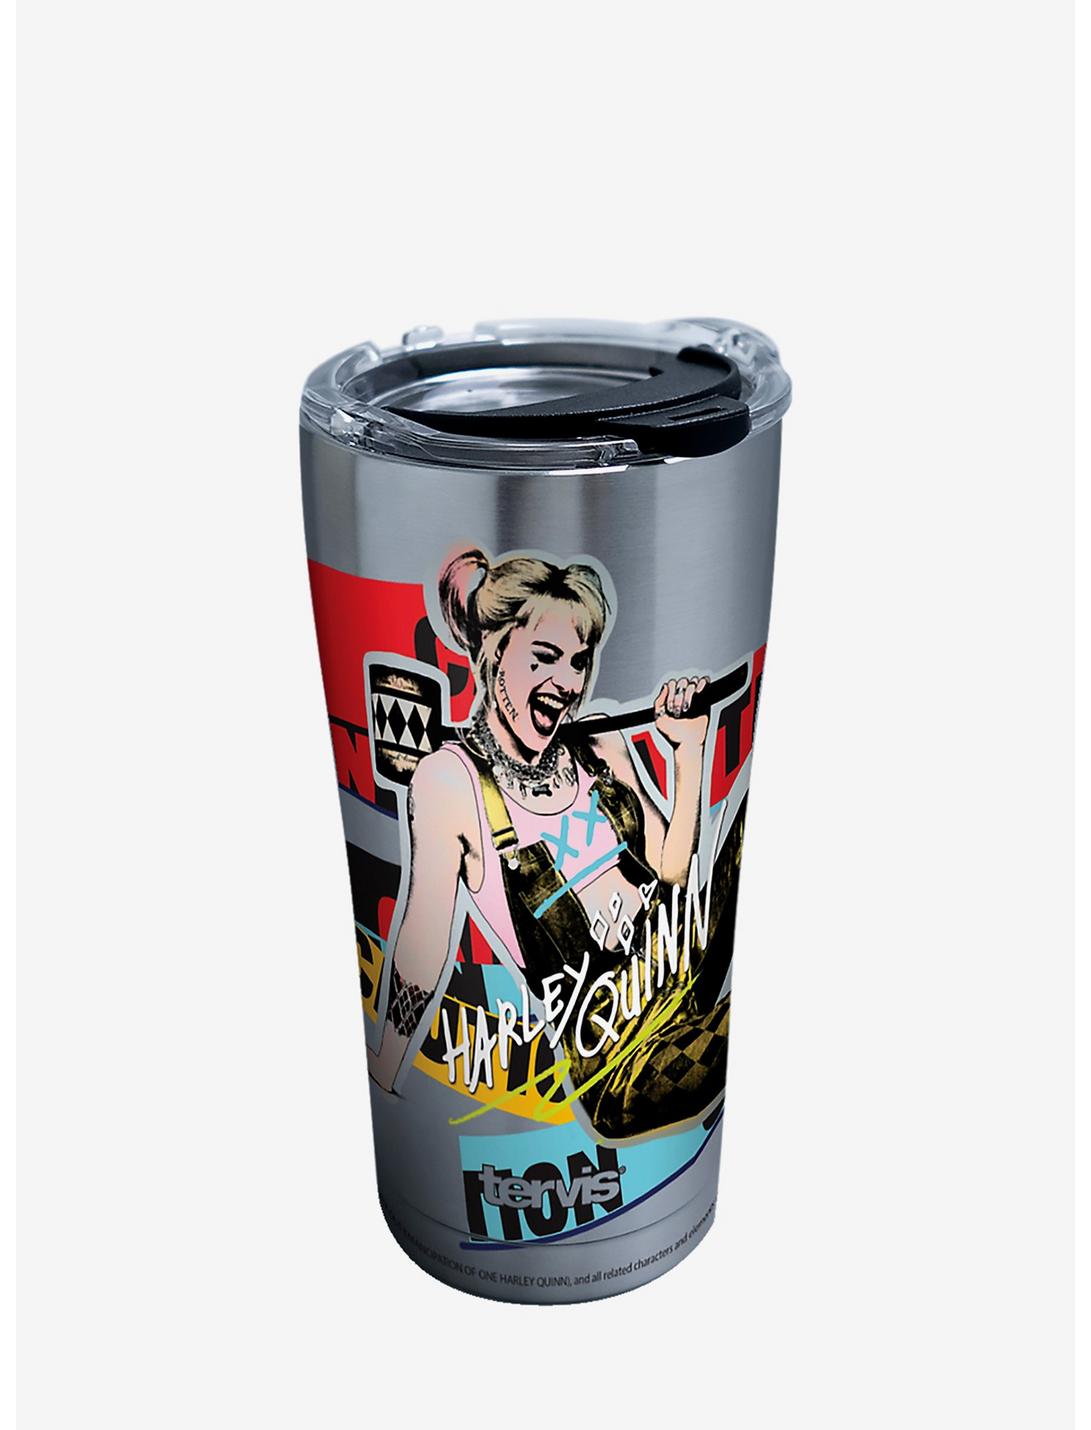 DC Comics Birds of Prey Harley Quinn 20oz Stainless Steel Tumbler With Lid, , hi-res